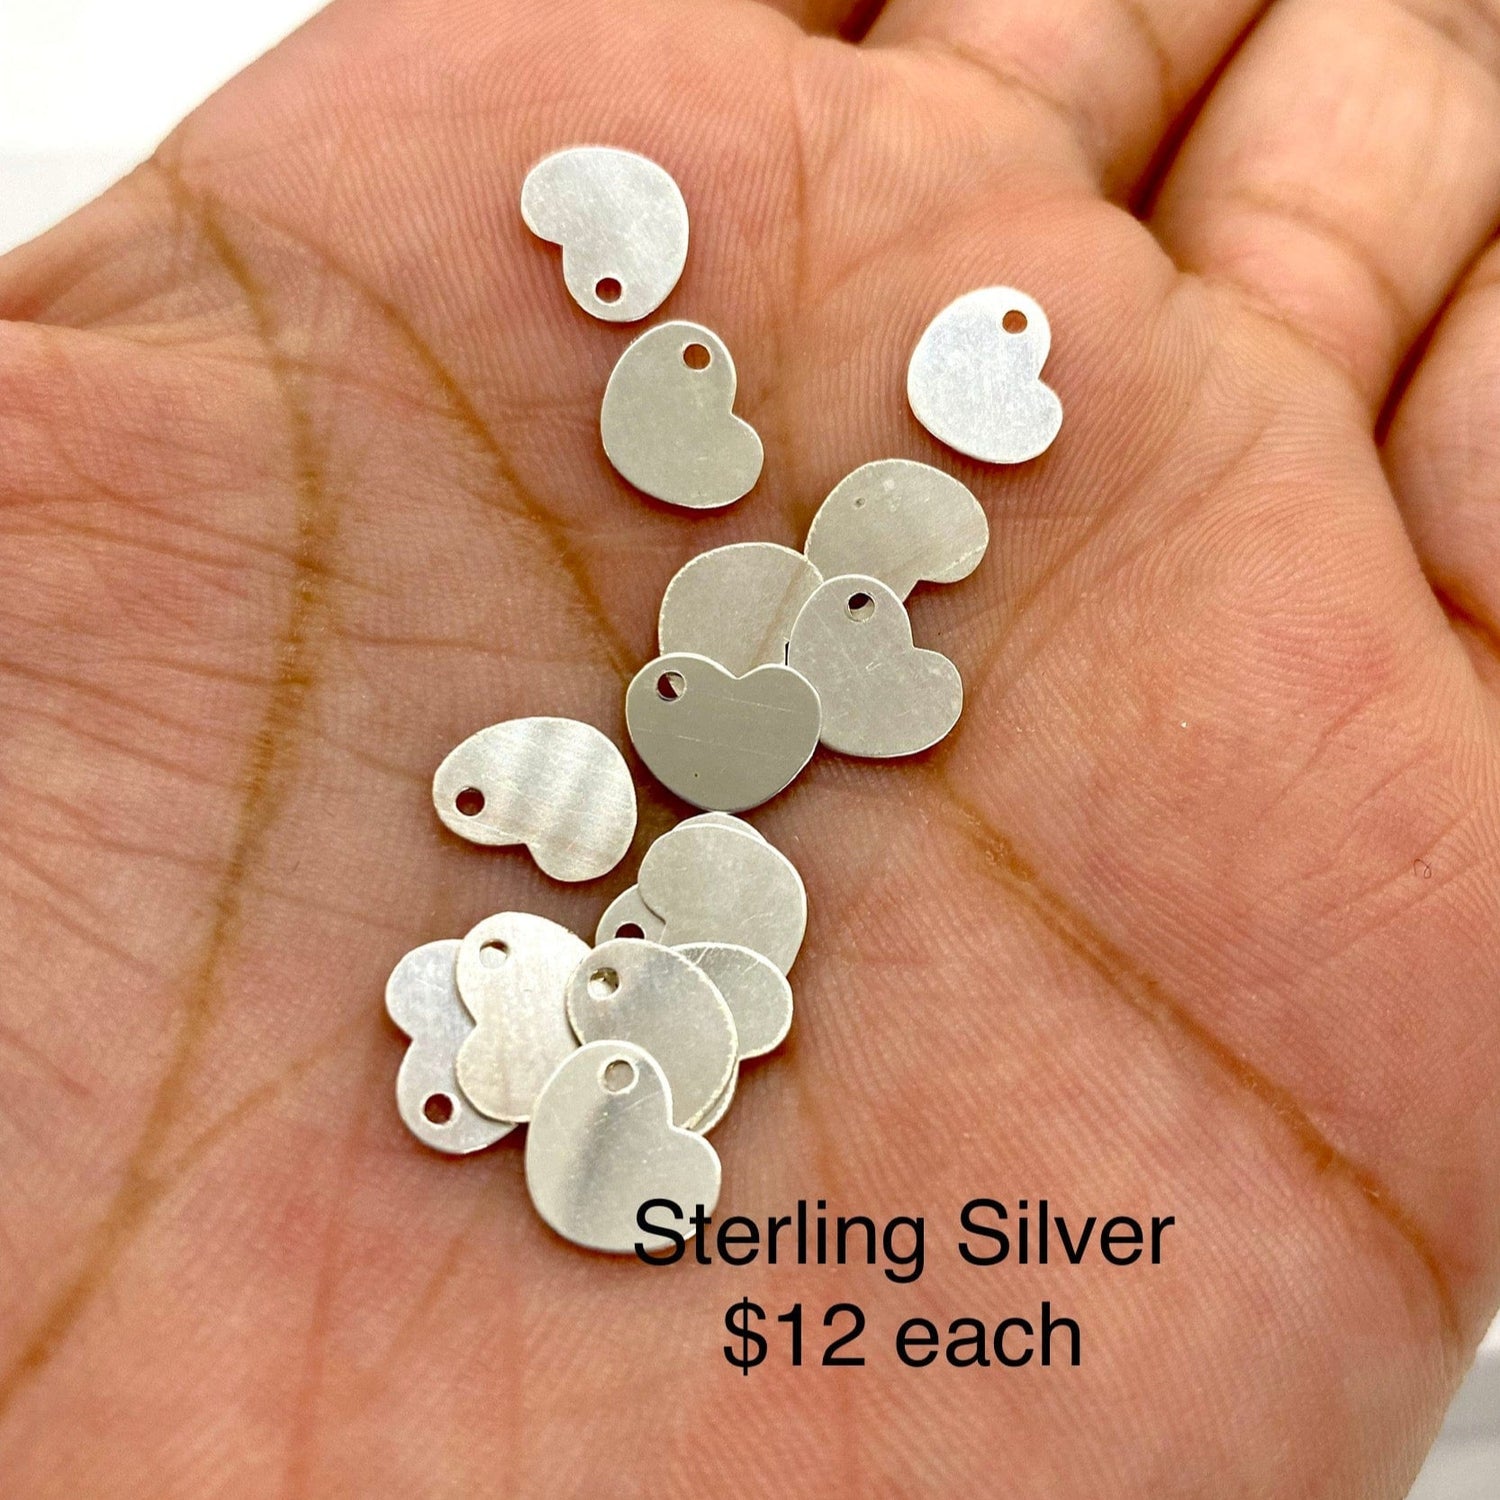 Sterling Silver charms for permanent jewelry